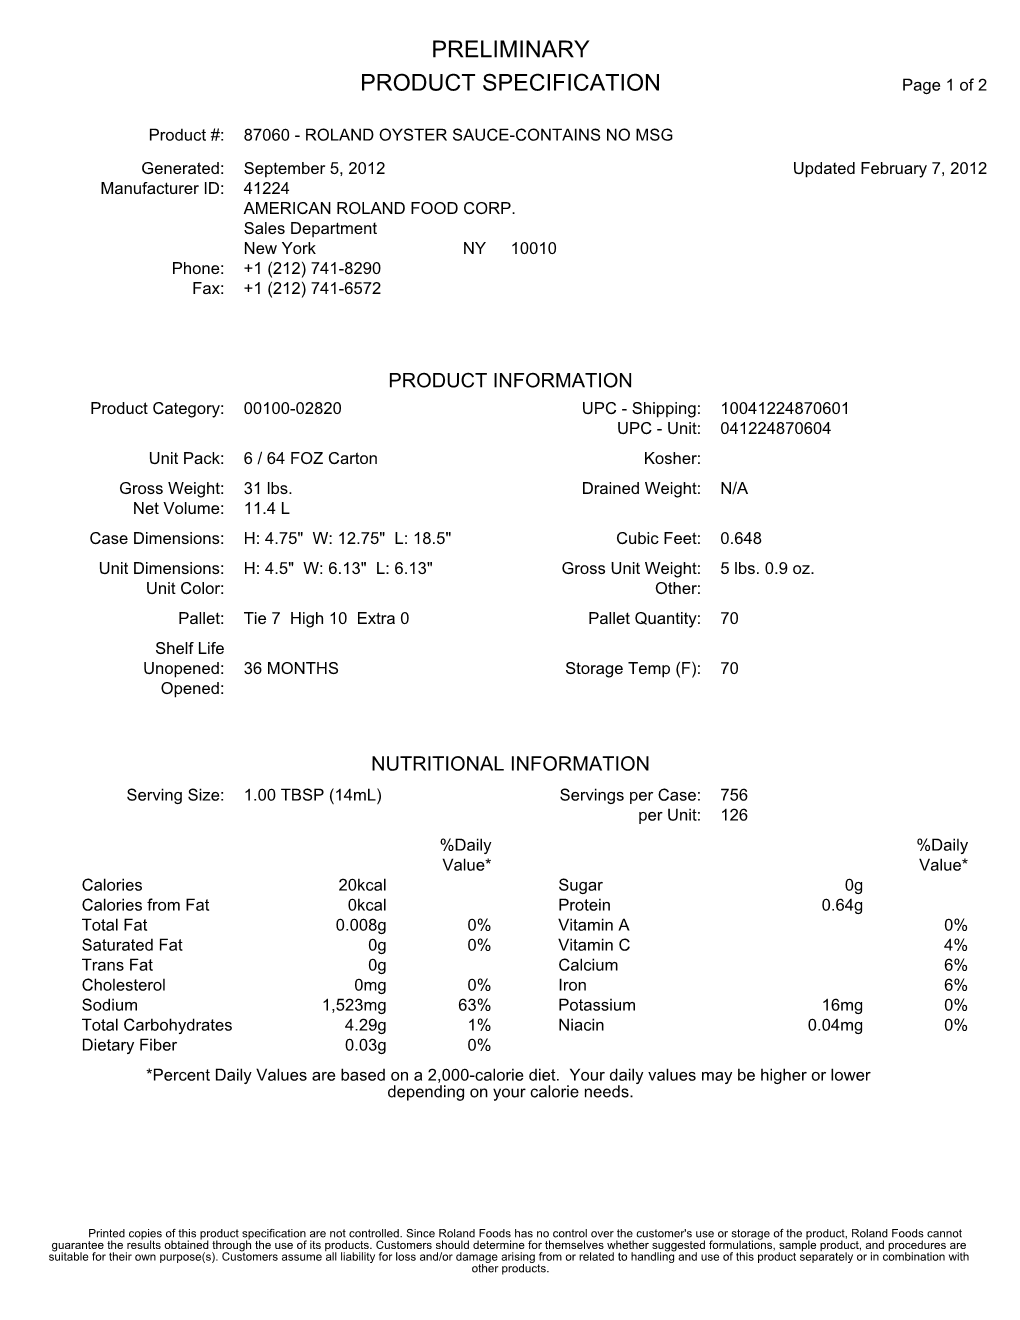 PRELIMINARY PRODUCT SPECIFICATION Page 1 of 2